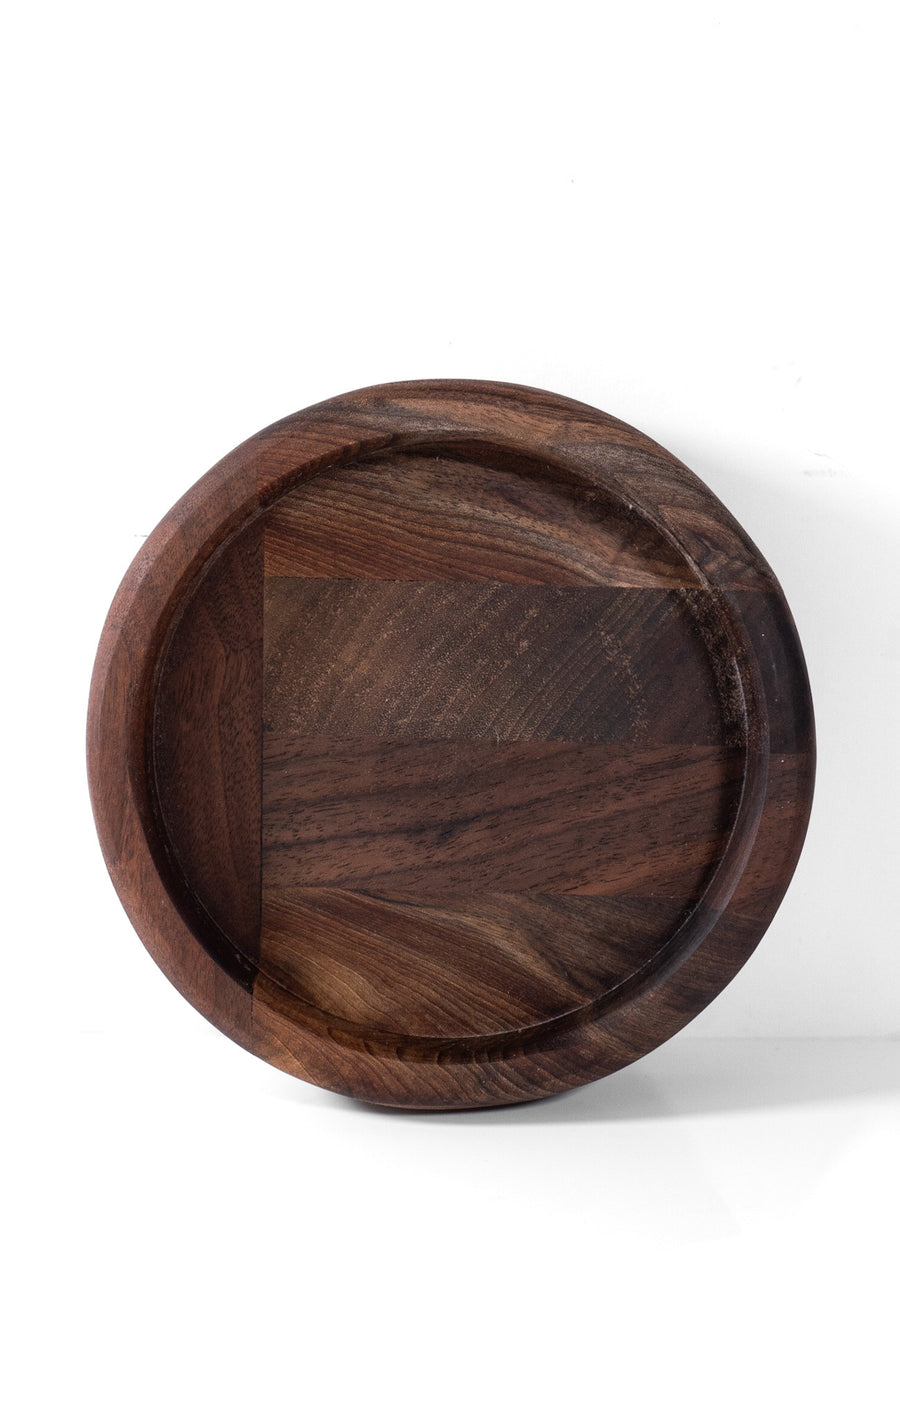 (135) Walnut Bowl 7"x1.5" by Bearded Ginger Woodworking